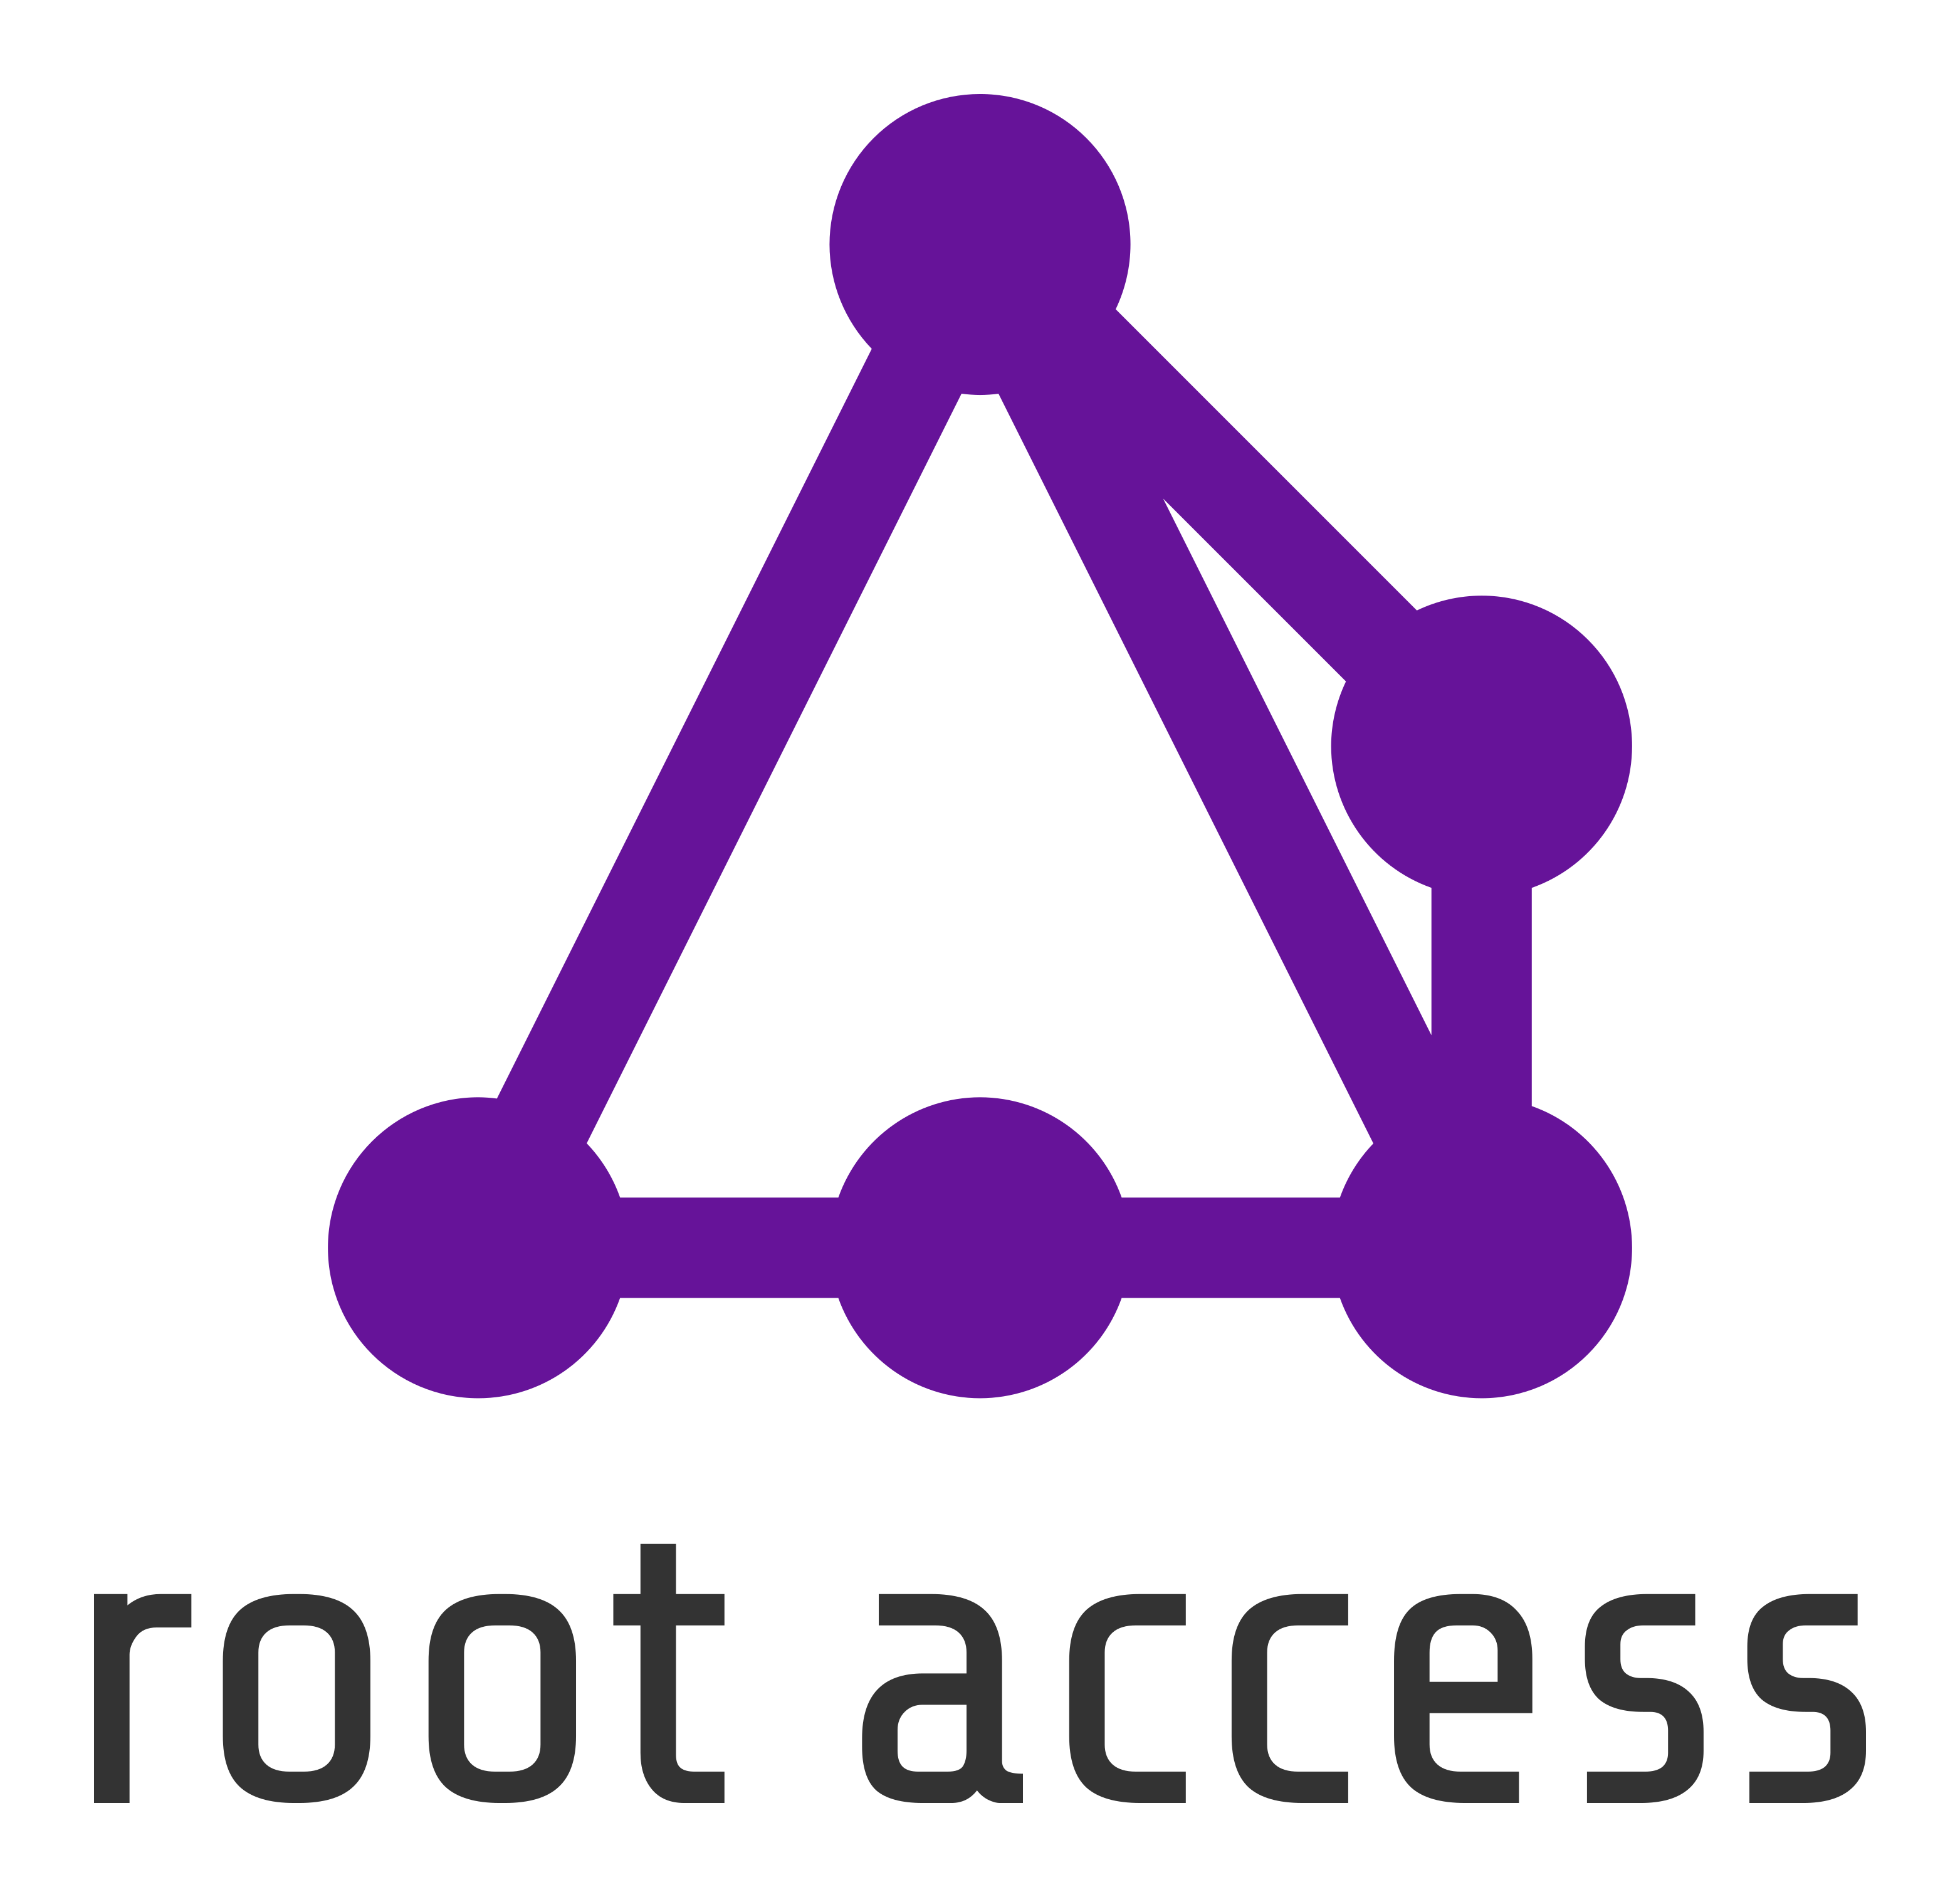 Rootaccess-logo-color-positive-vertical.png